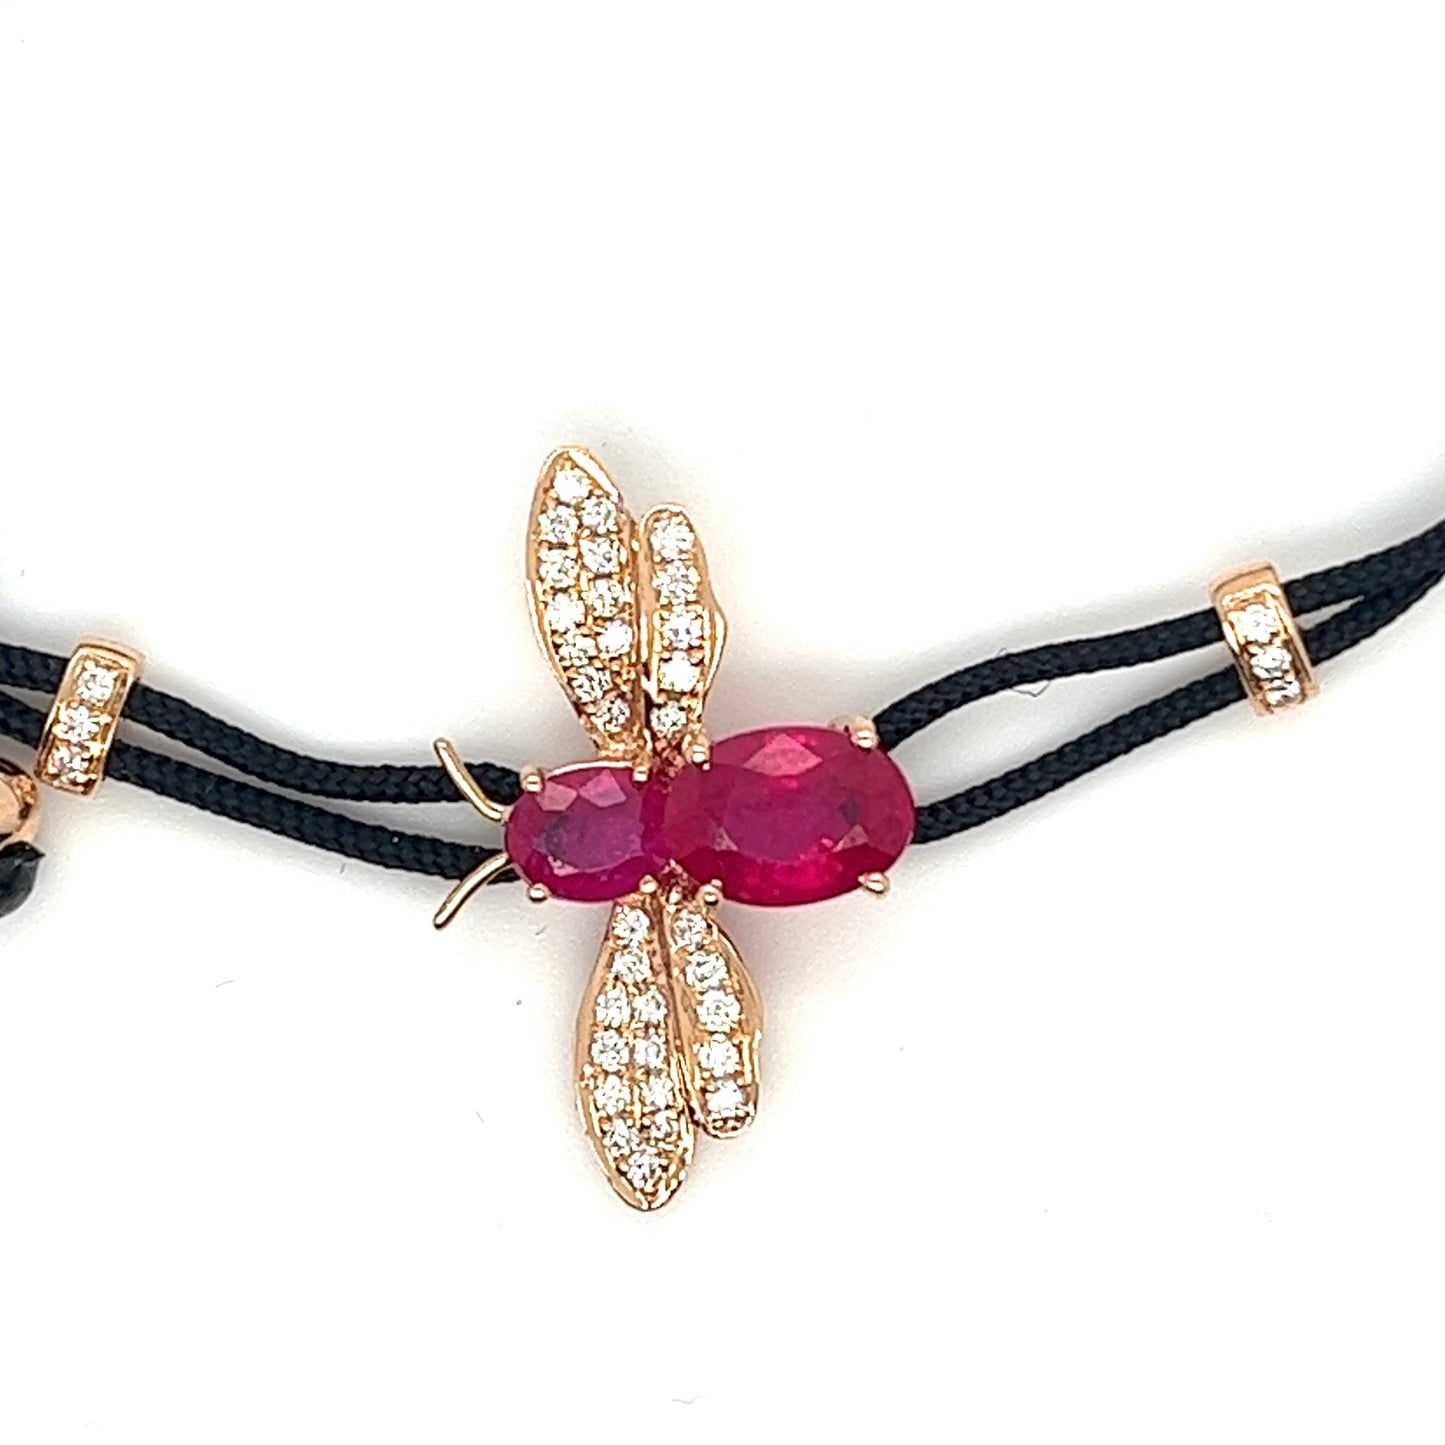 18K Rose Gold Bee Bracelet with Rubies and Diamonds